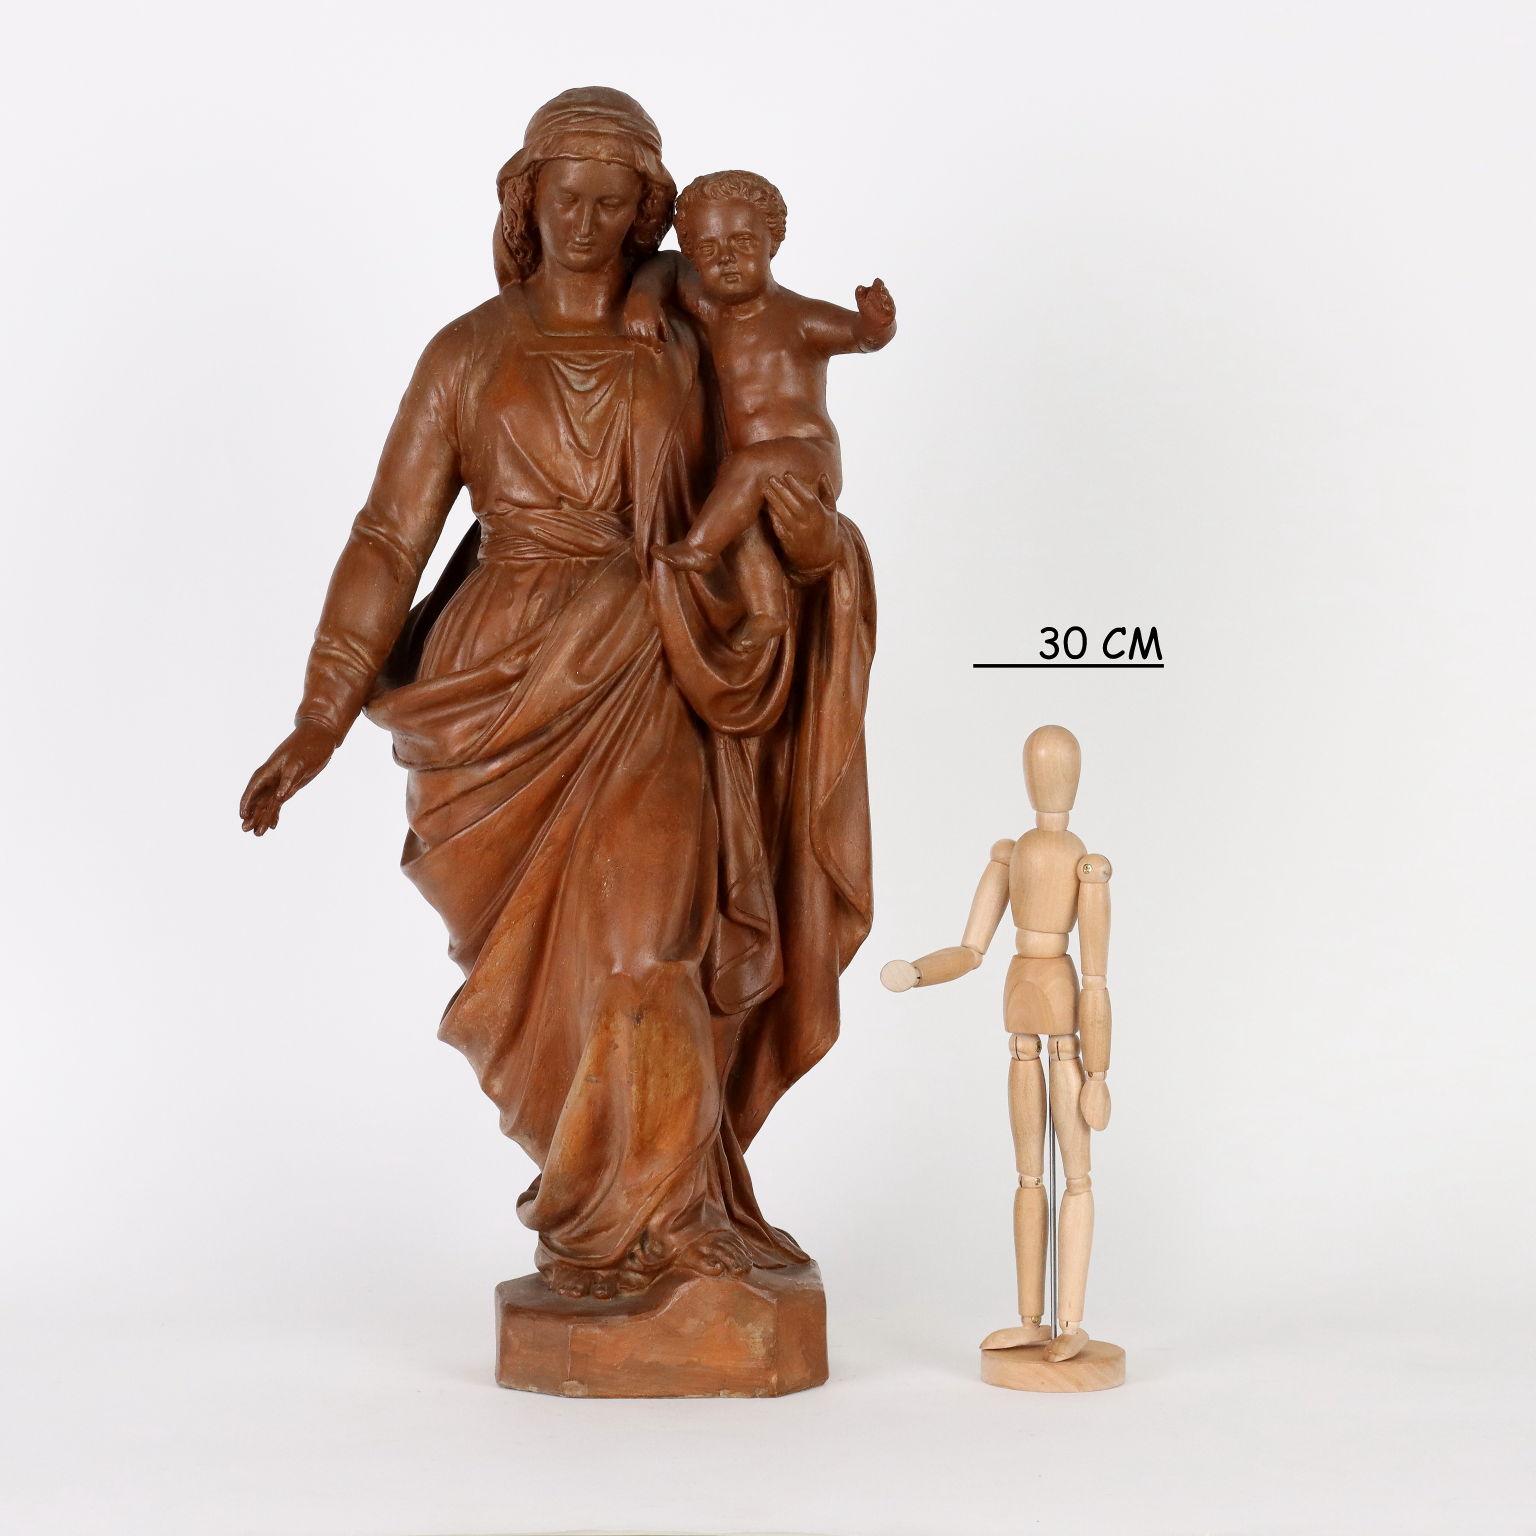 Terracotta sculpture depicting Madonna with child.